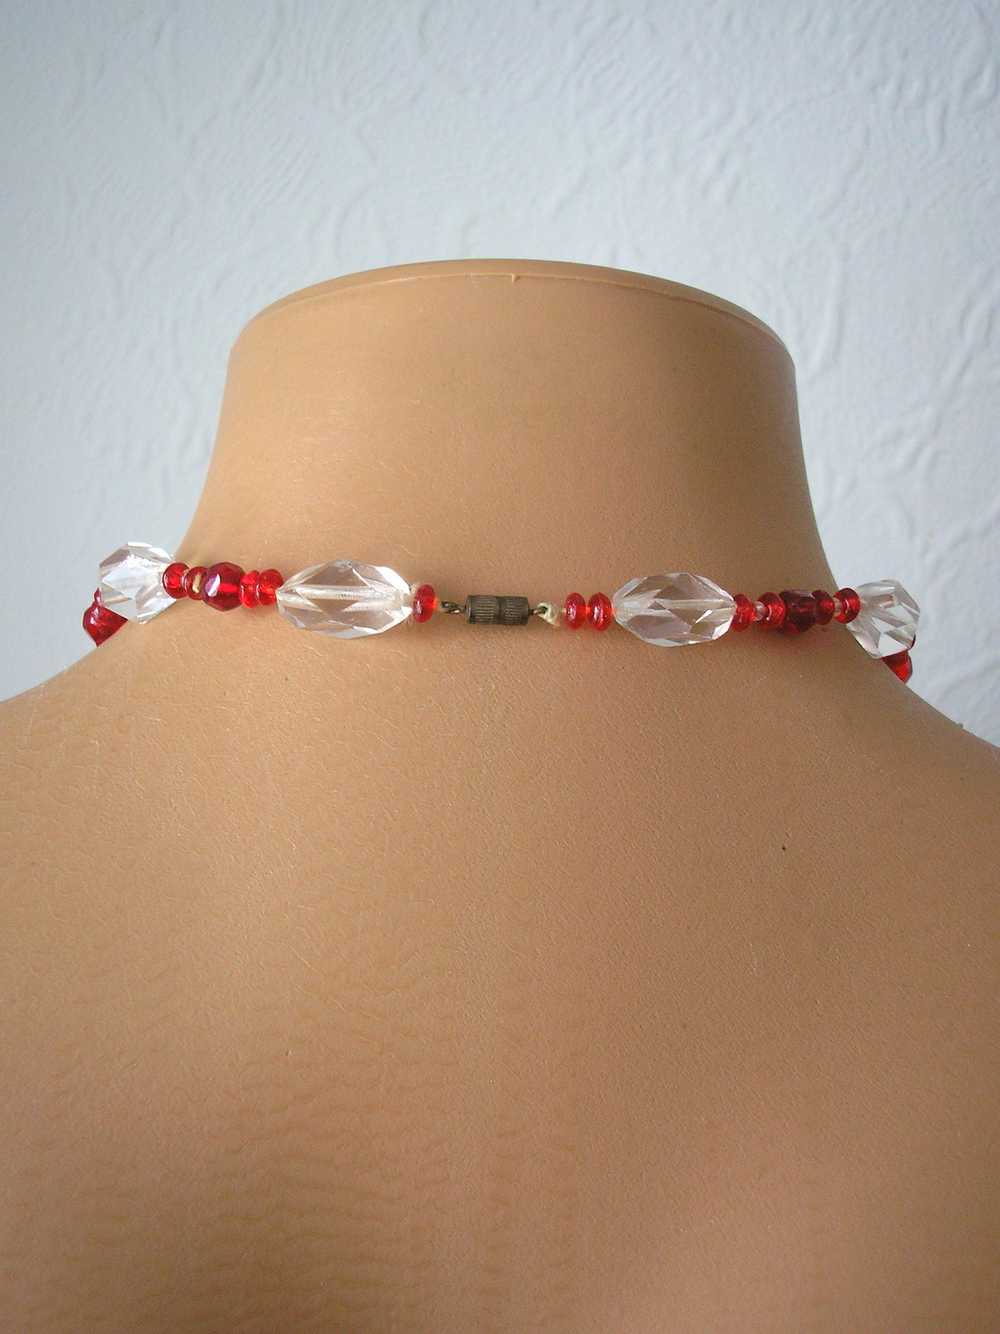 ART DECO 1920's/30's Red Cut Glass Necklace - image 4